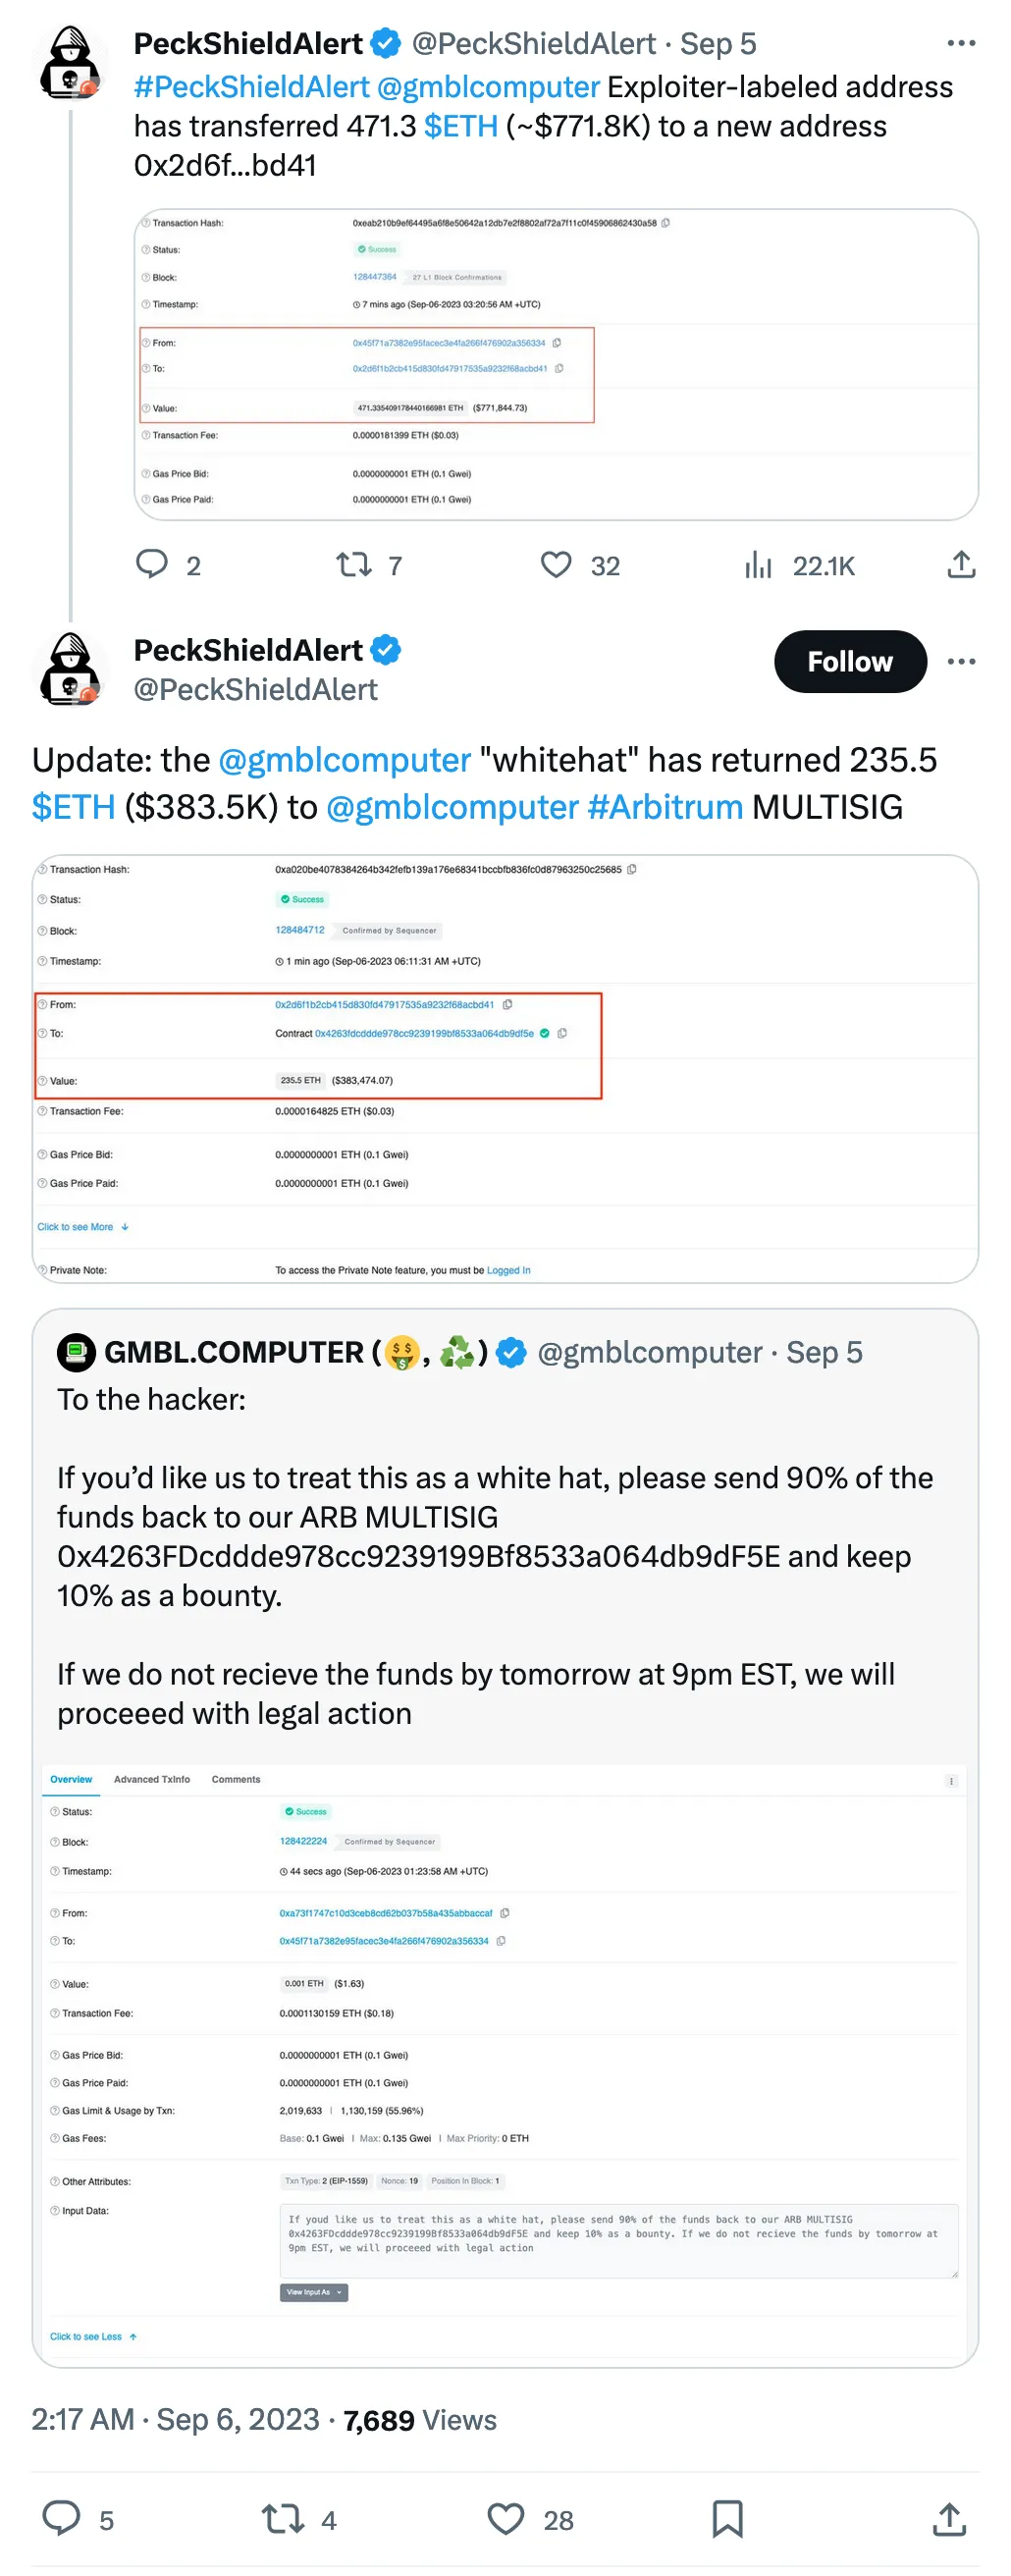 #PeckShieldAlert 
@gmblcomputer
 Exploiter-labeled address has transferred 471.3 $ETH (~$771.8K) to a new address 0x2d6f...bd41 
Tweeted at 11:29 PM · Sep 5, 2023

Update: the 
@gmblcomputer
 "whitehat" has returned 235.5 $ETH ($383.5K) to 
@gmblcomputer
 #Arbitrum MULTISIG  
Tweeted at Sep 6